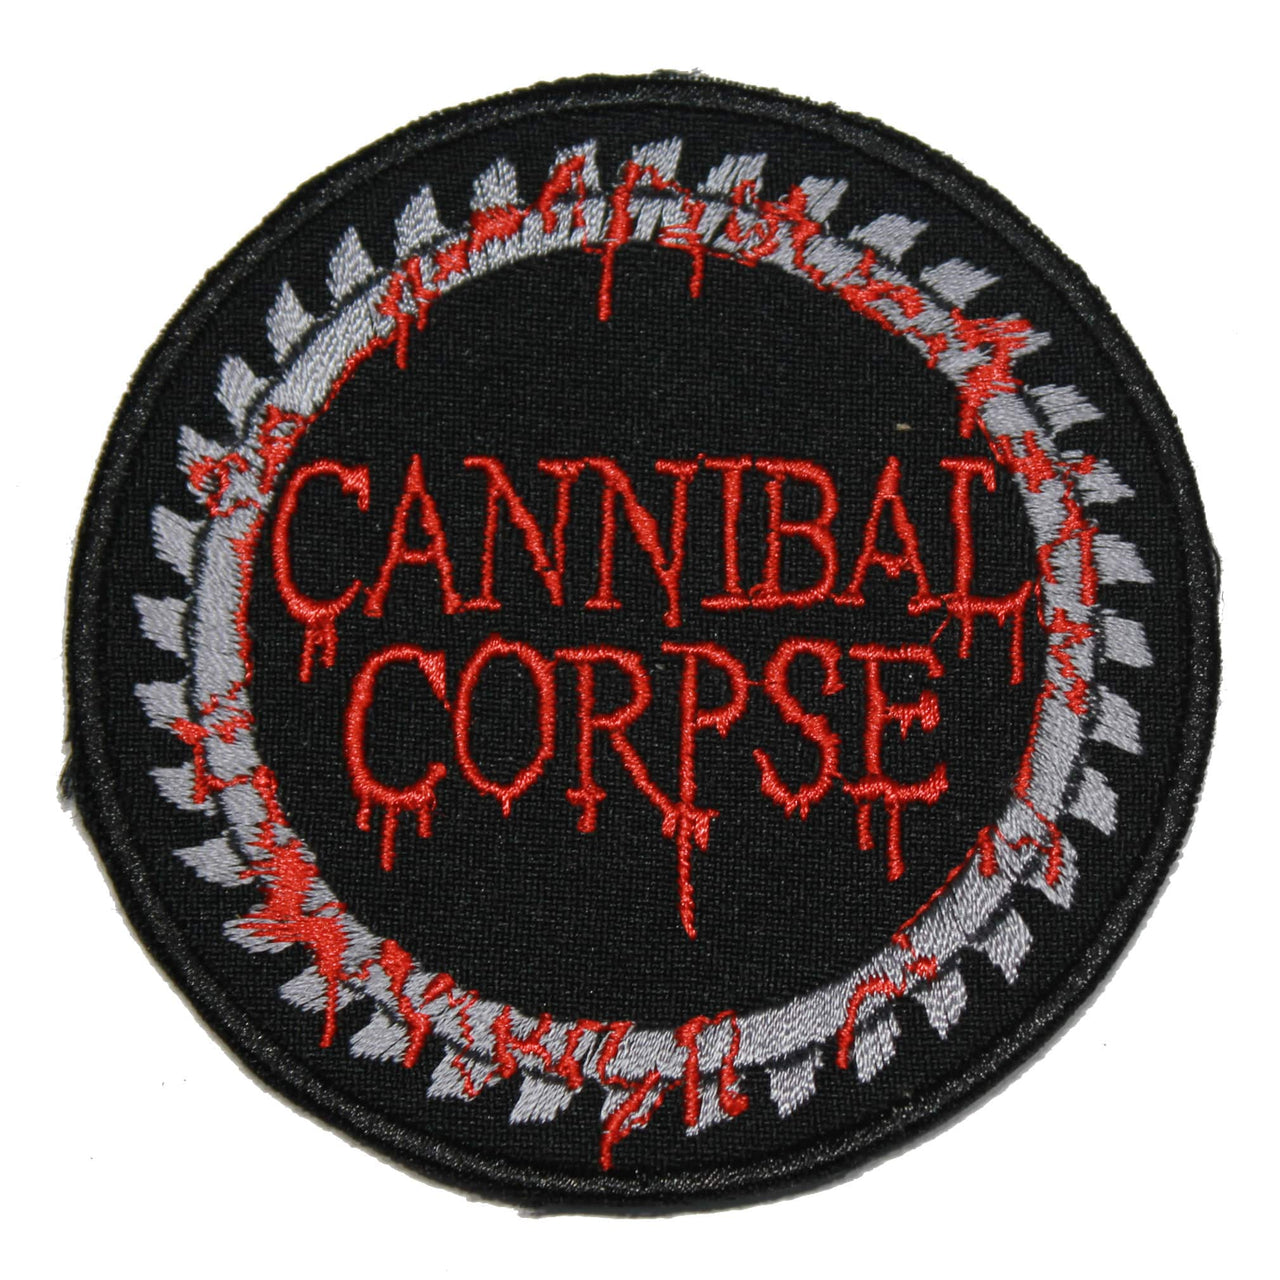 Cannibal Corpse Saw Blade Patch